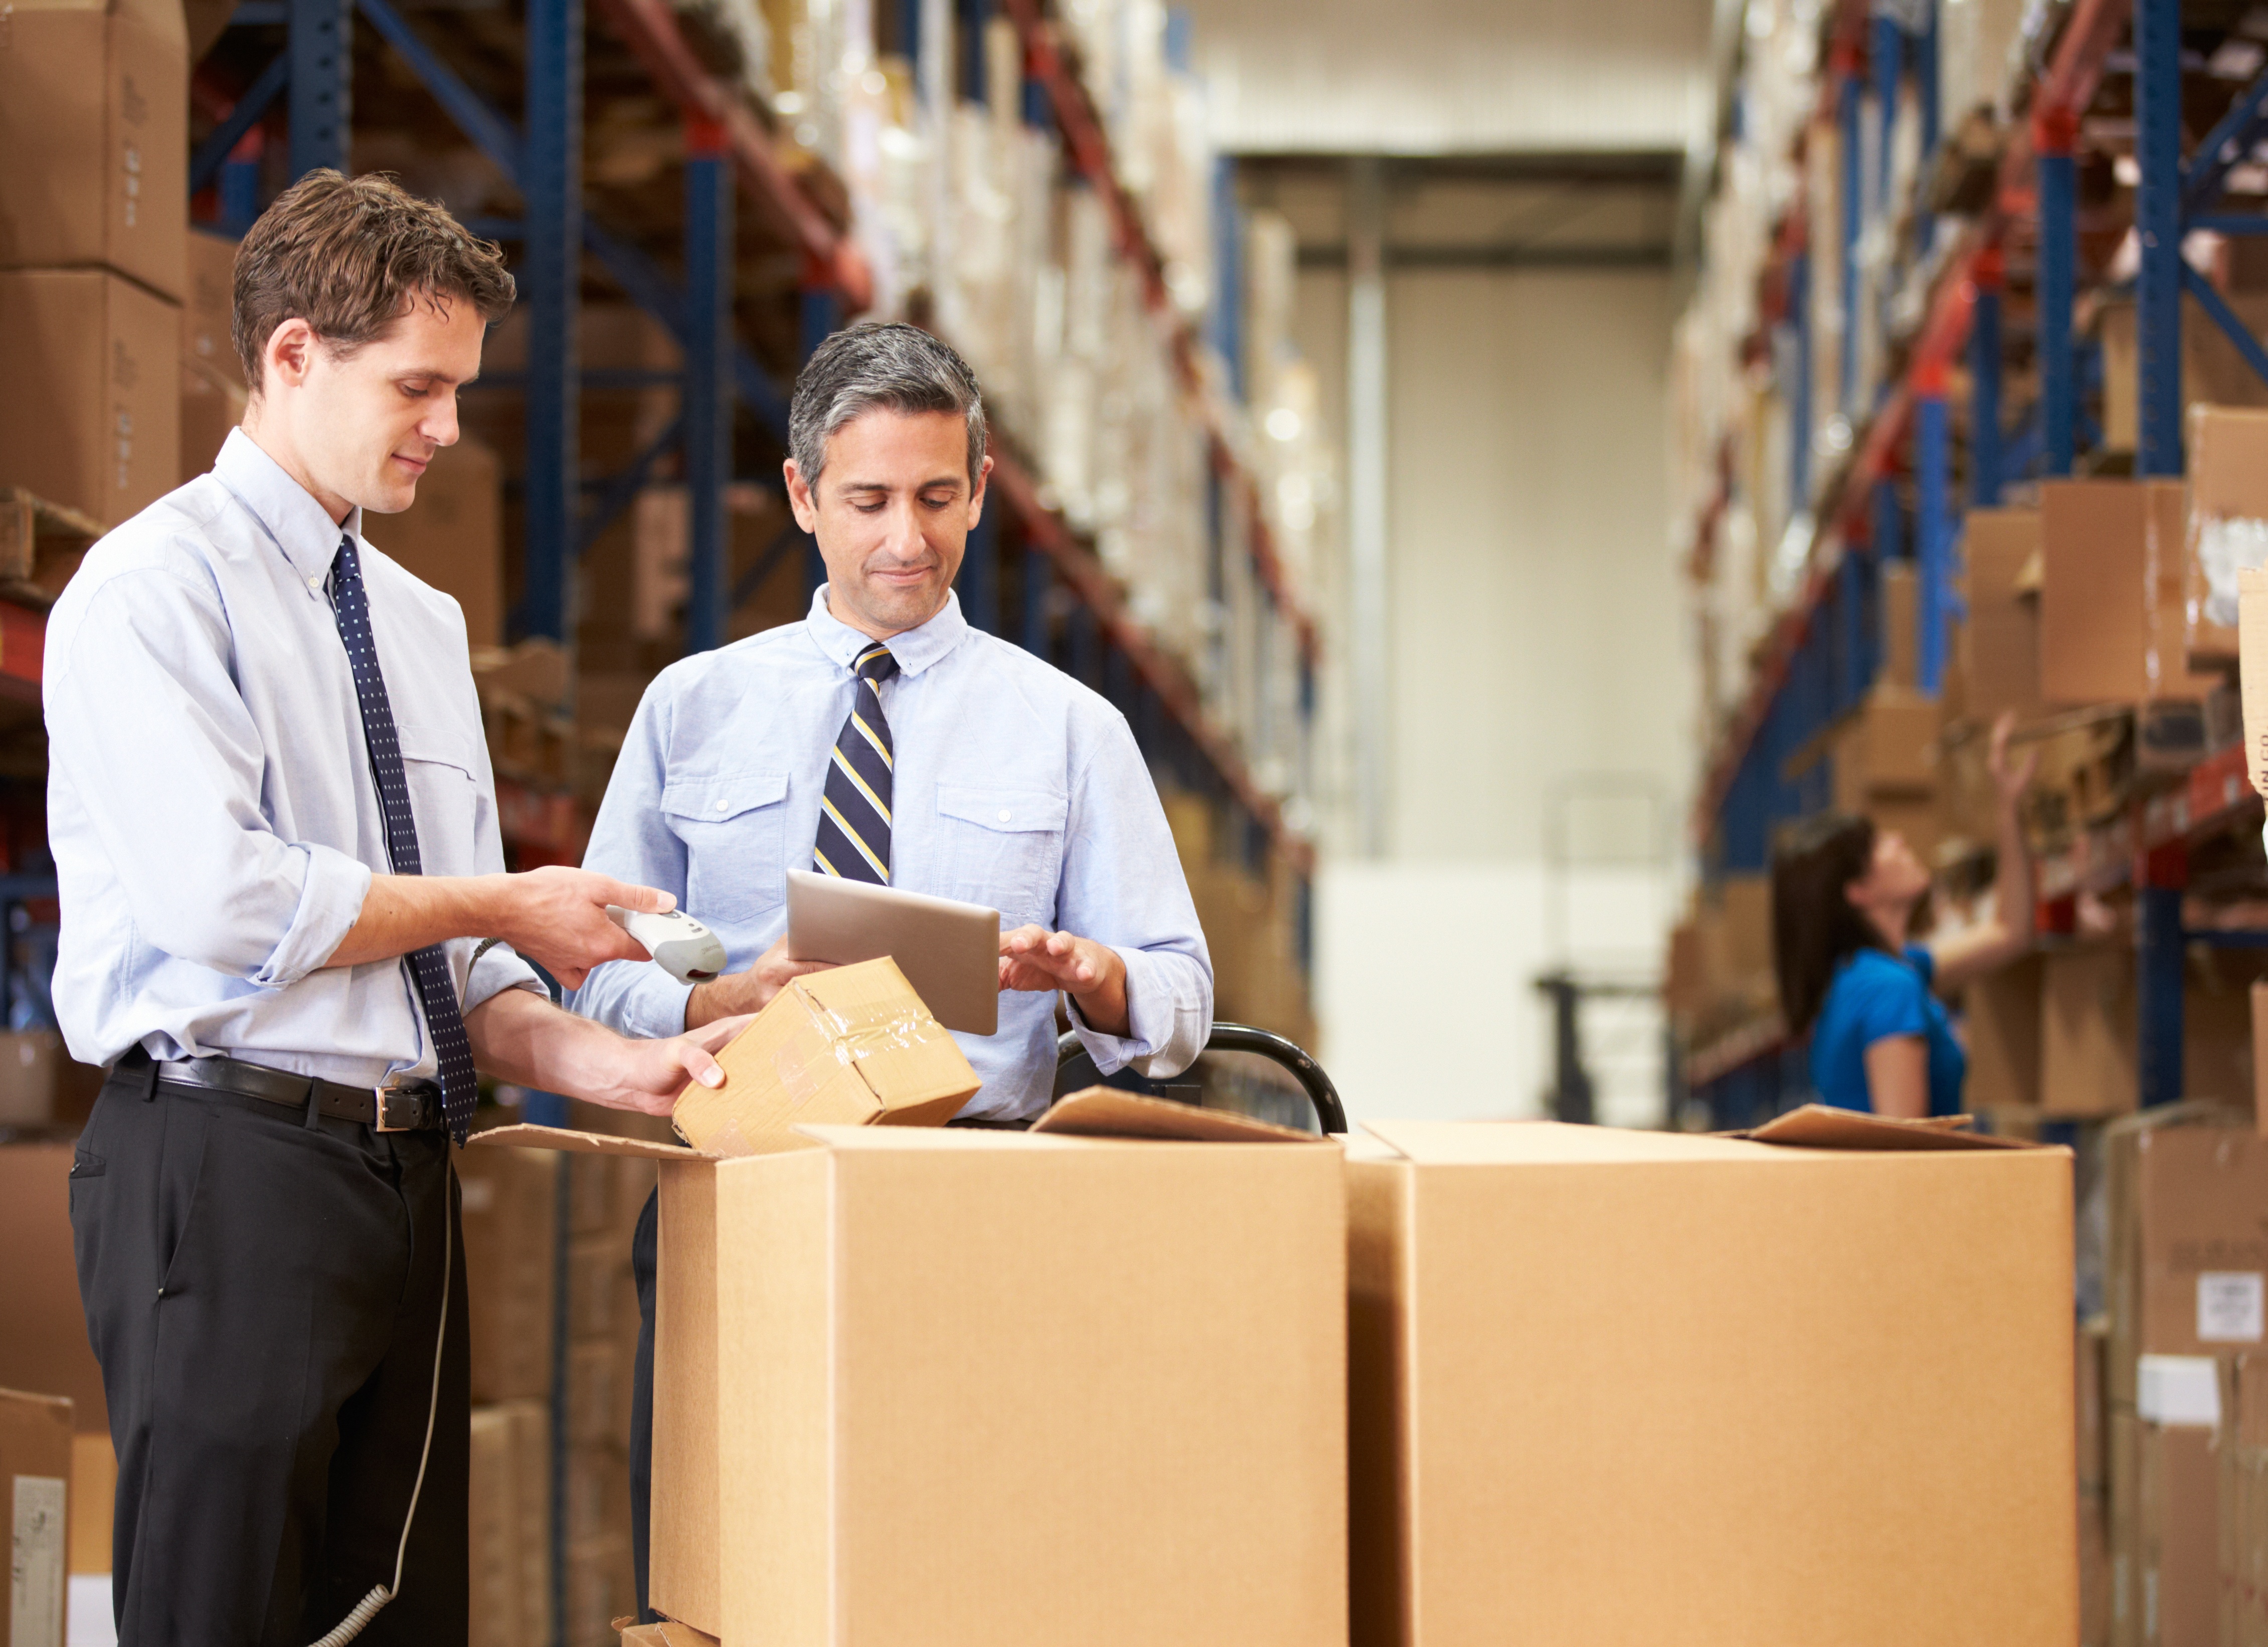 How to Speed Up Order Fulfillment without Compromising Accuracy